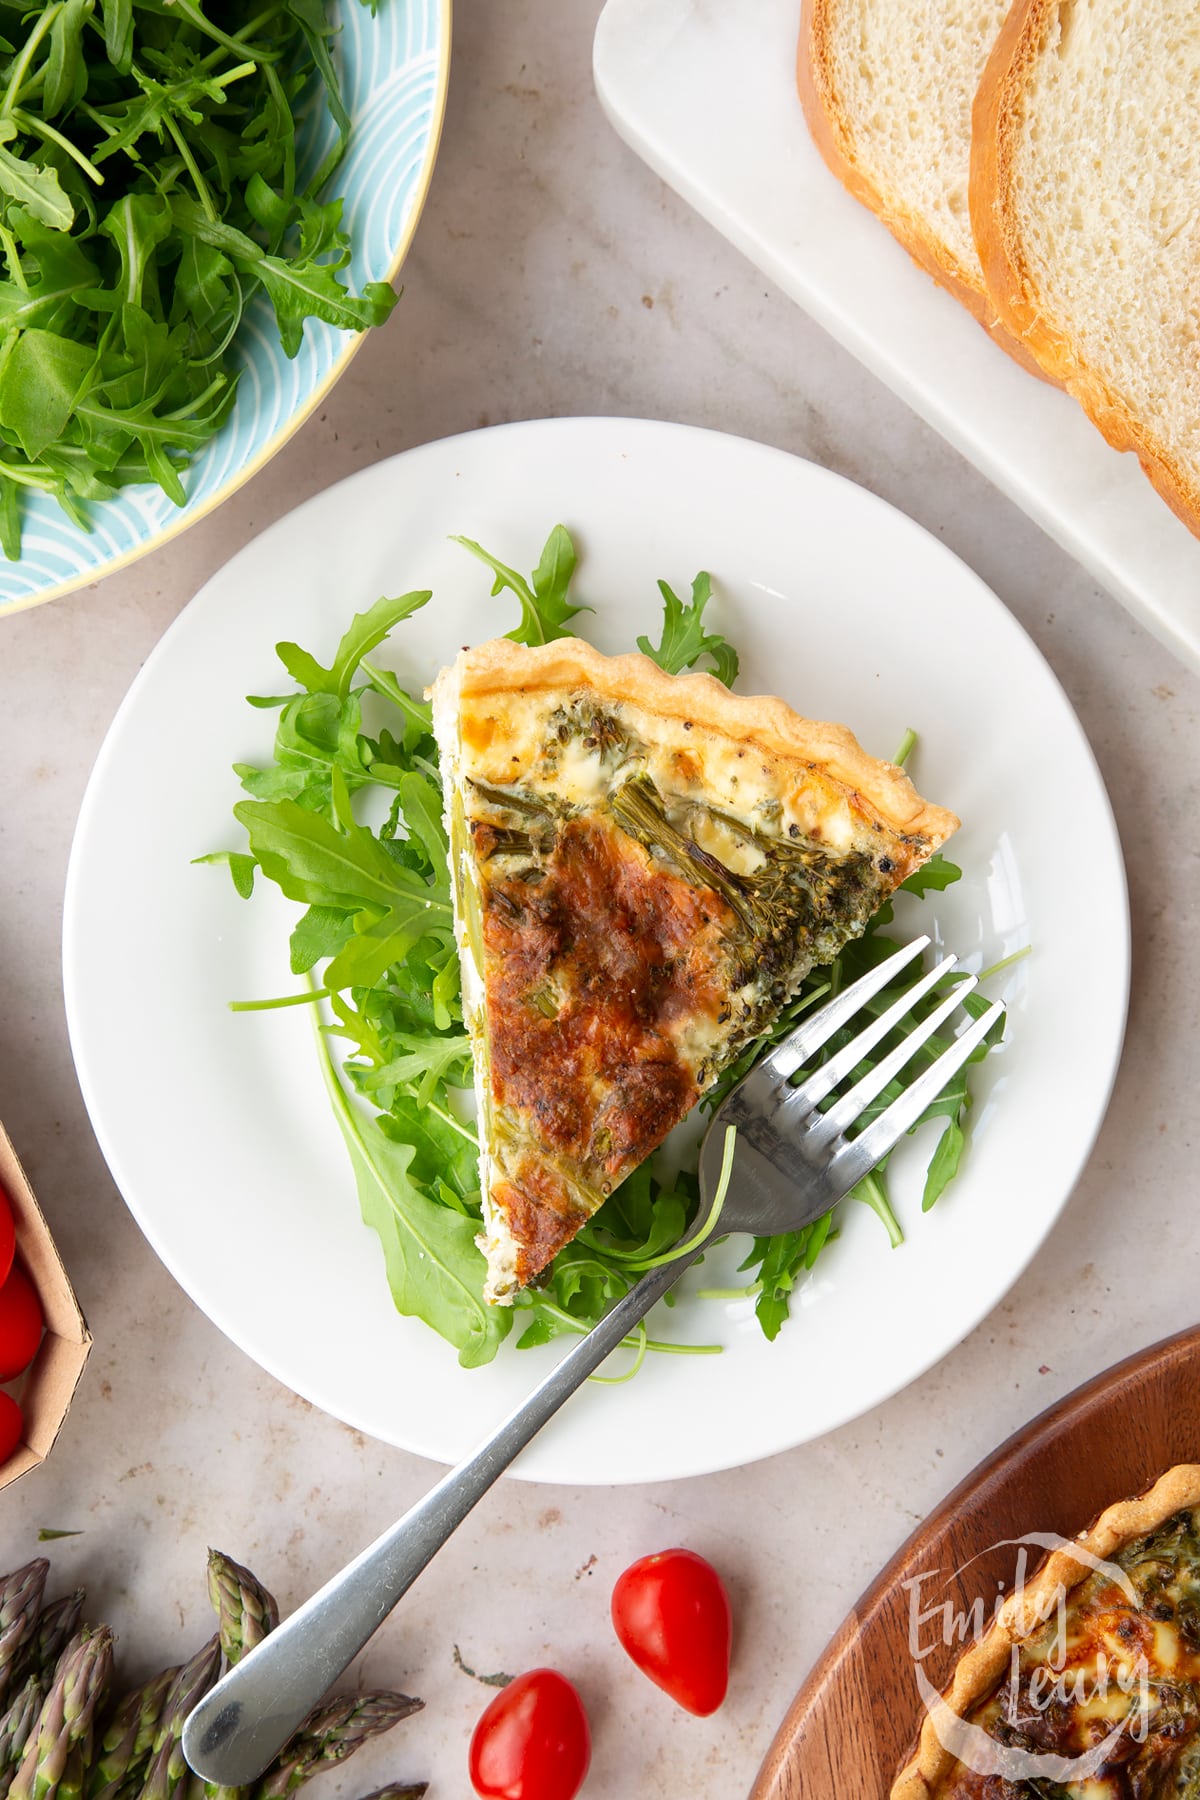 Overhead shot of the finished slice of broccoli and asparagus quiche served on a white plate ontop of a bed of salad with a fork on the side.